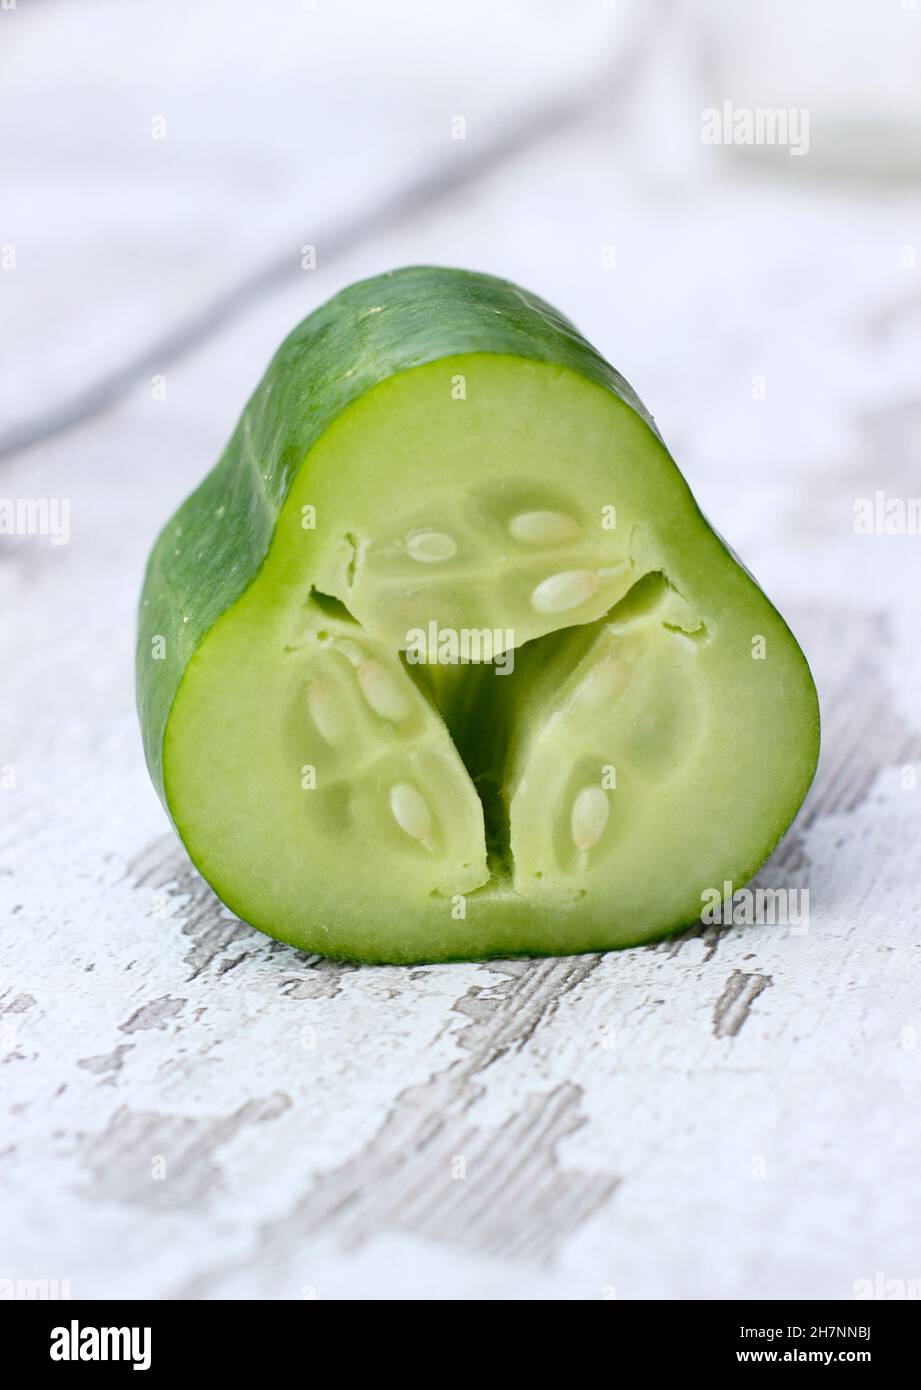 Homegrown cucumber with a hollow heart due to problematic growing conditions. UK Stock Photo